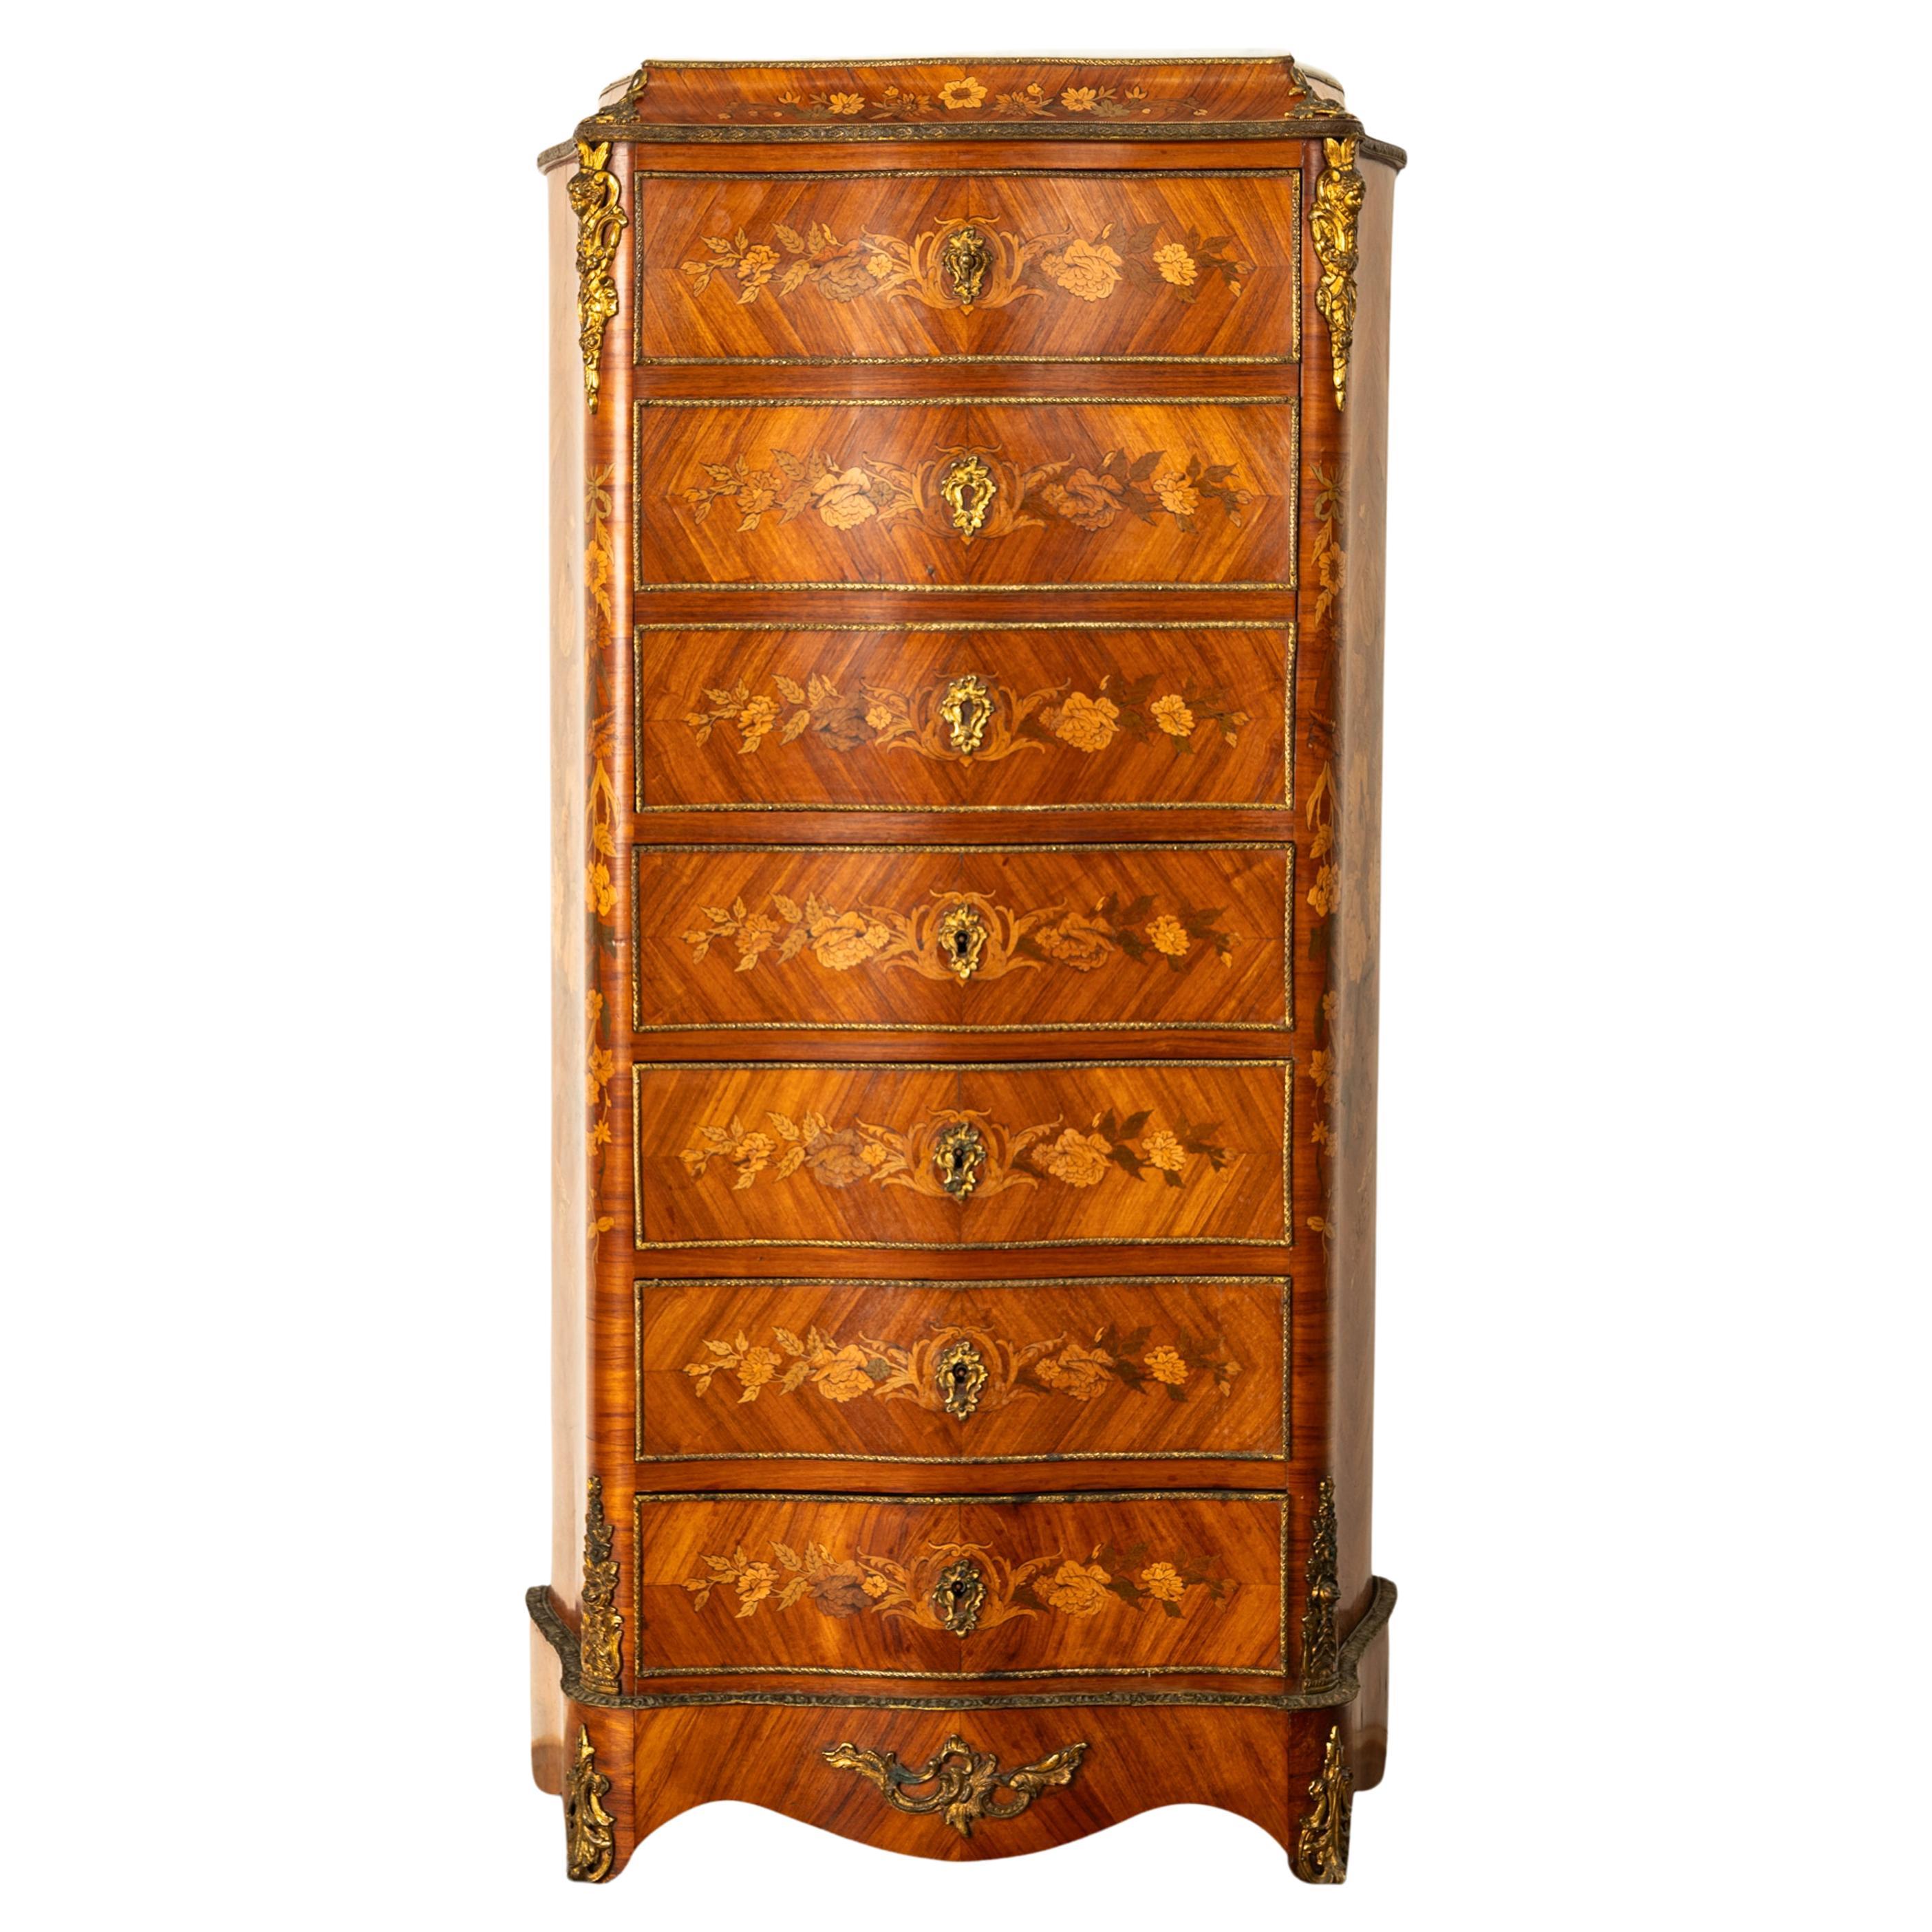 Gilt Fine Antique French Louis XV Marquetry Rosewood Ormolu Secretaire Abattant 1880 For Sale